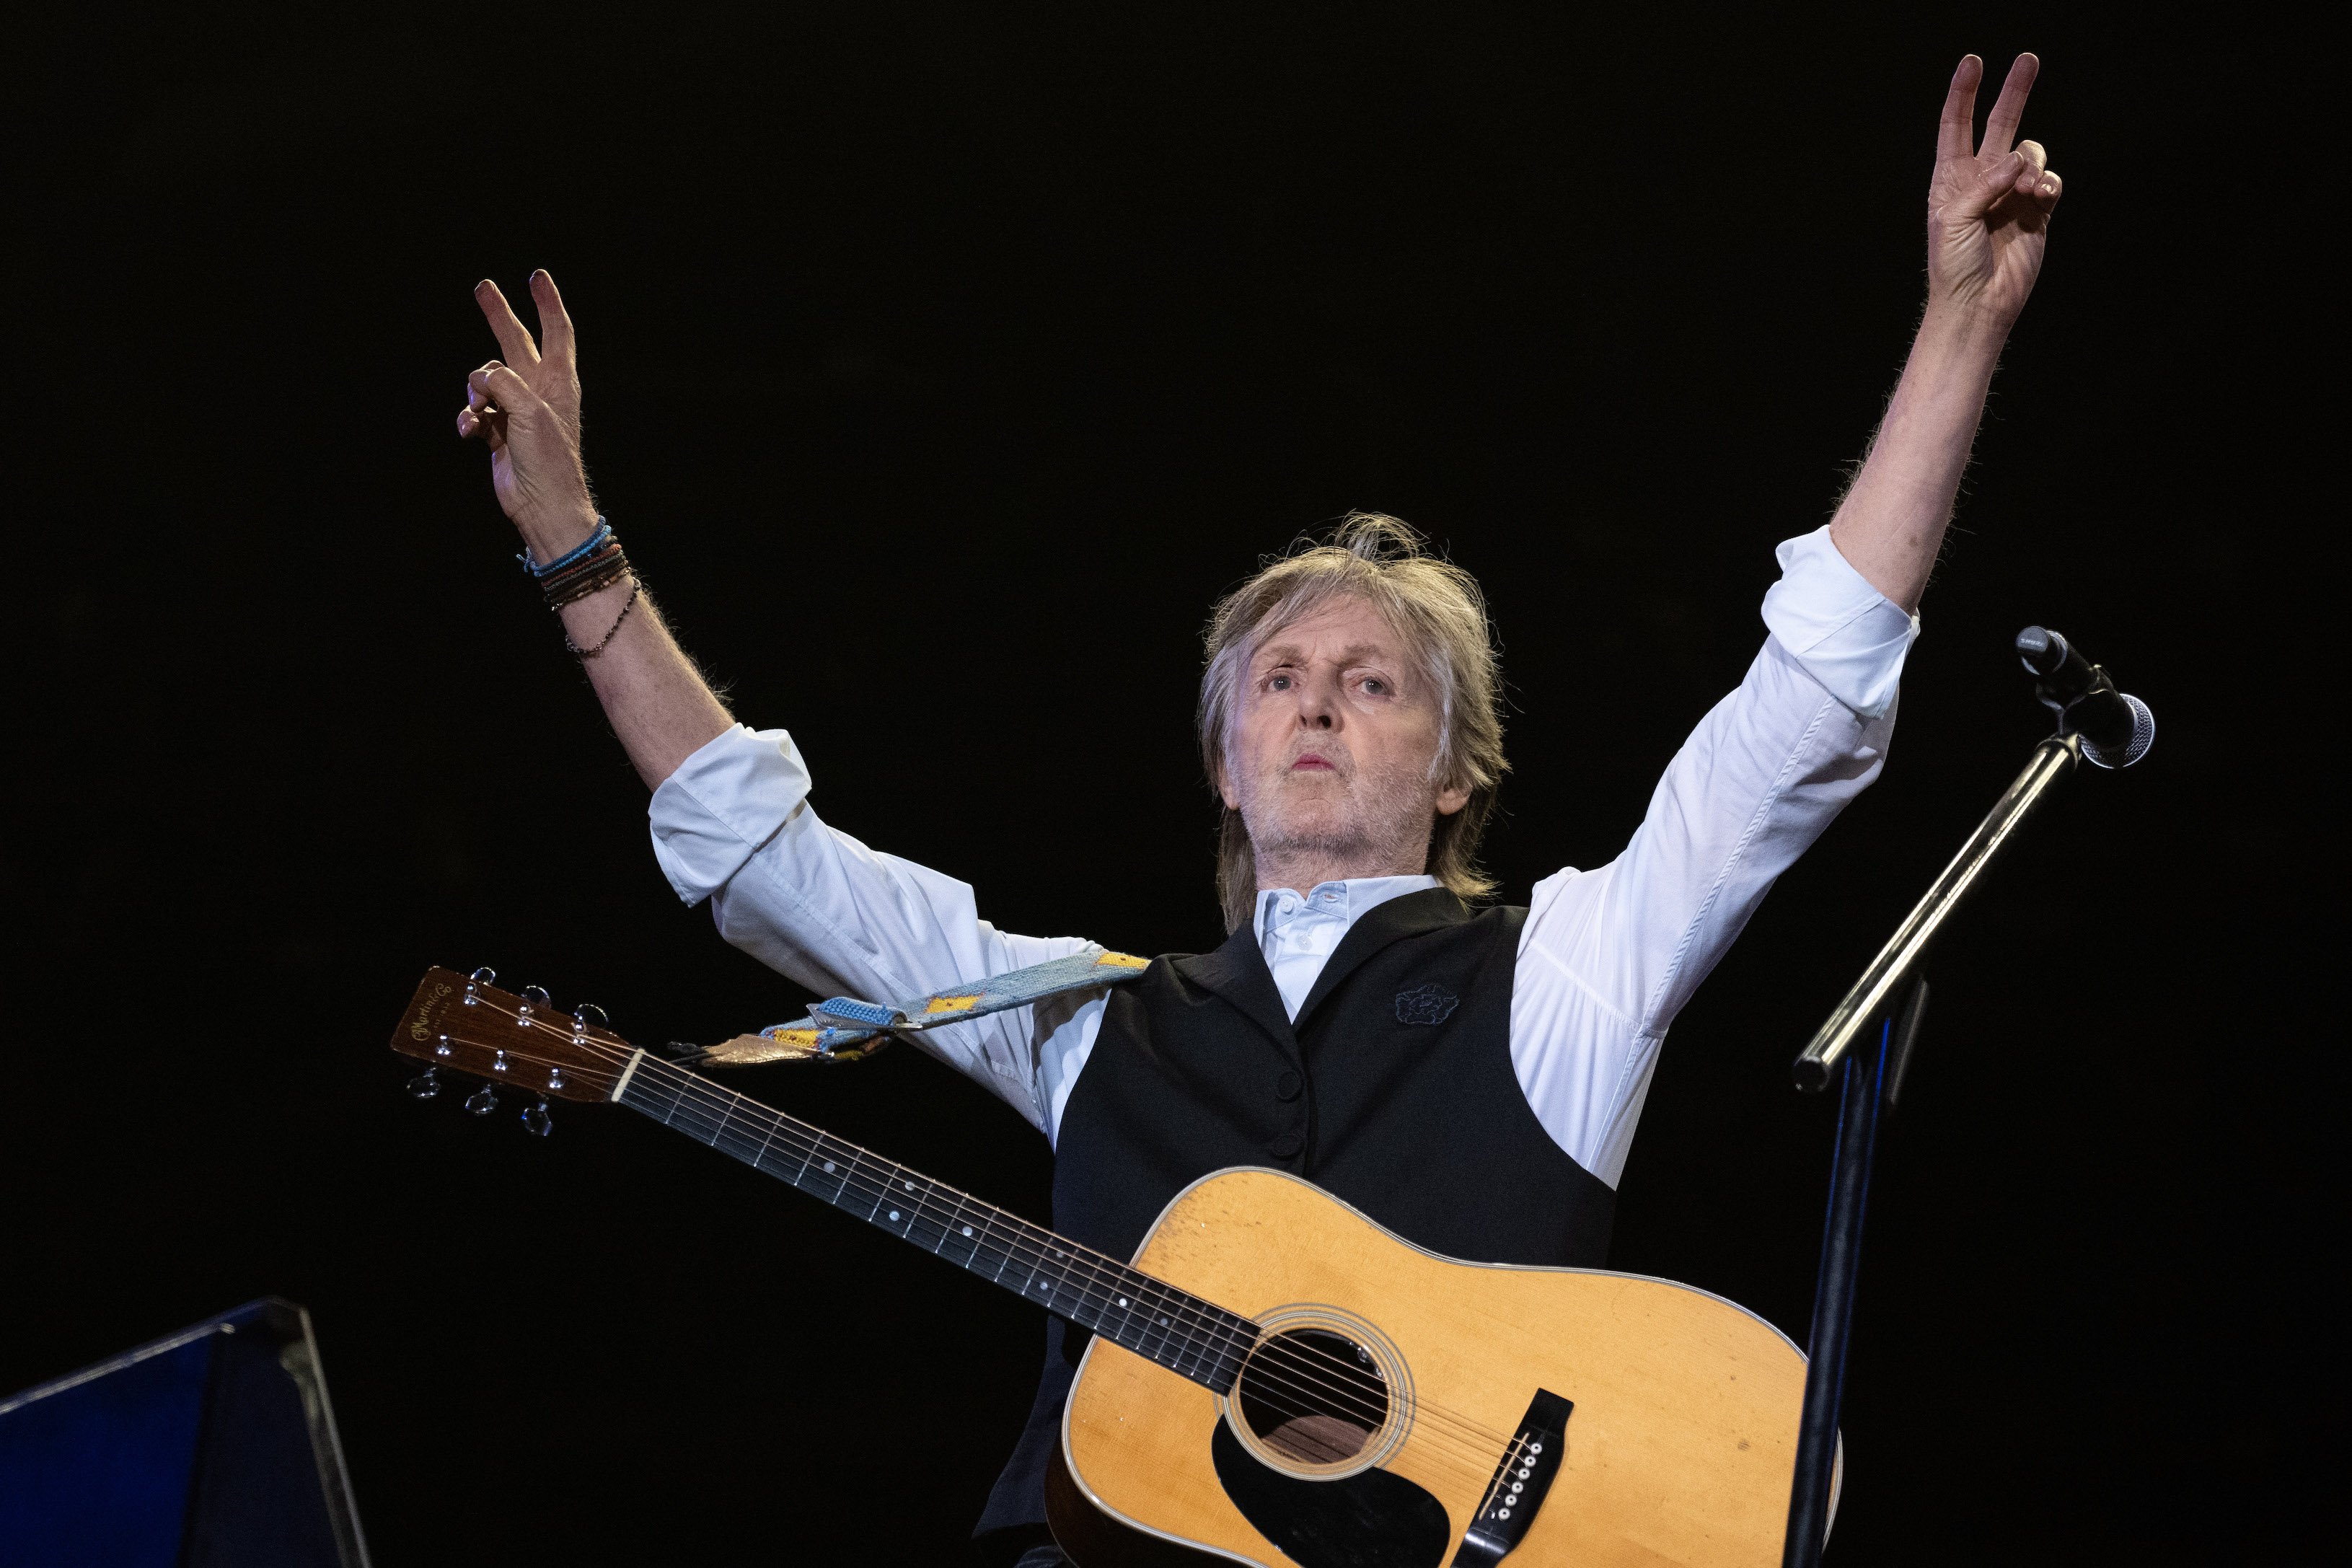 Paul McCartney performs at day four of the Glastonbury Festival